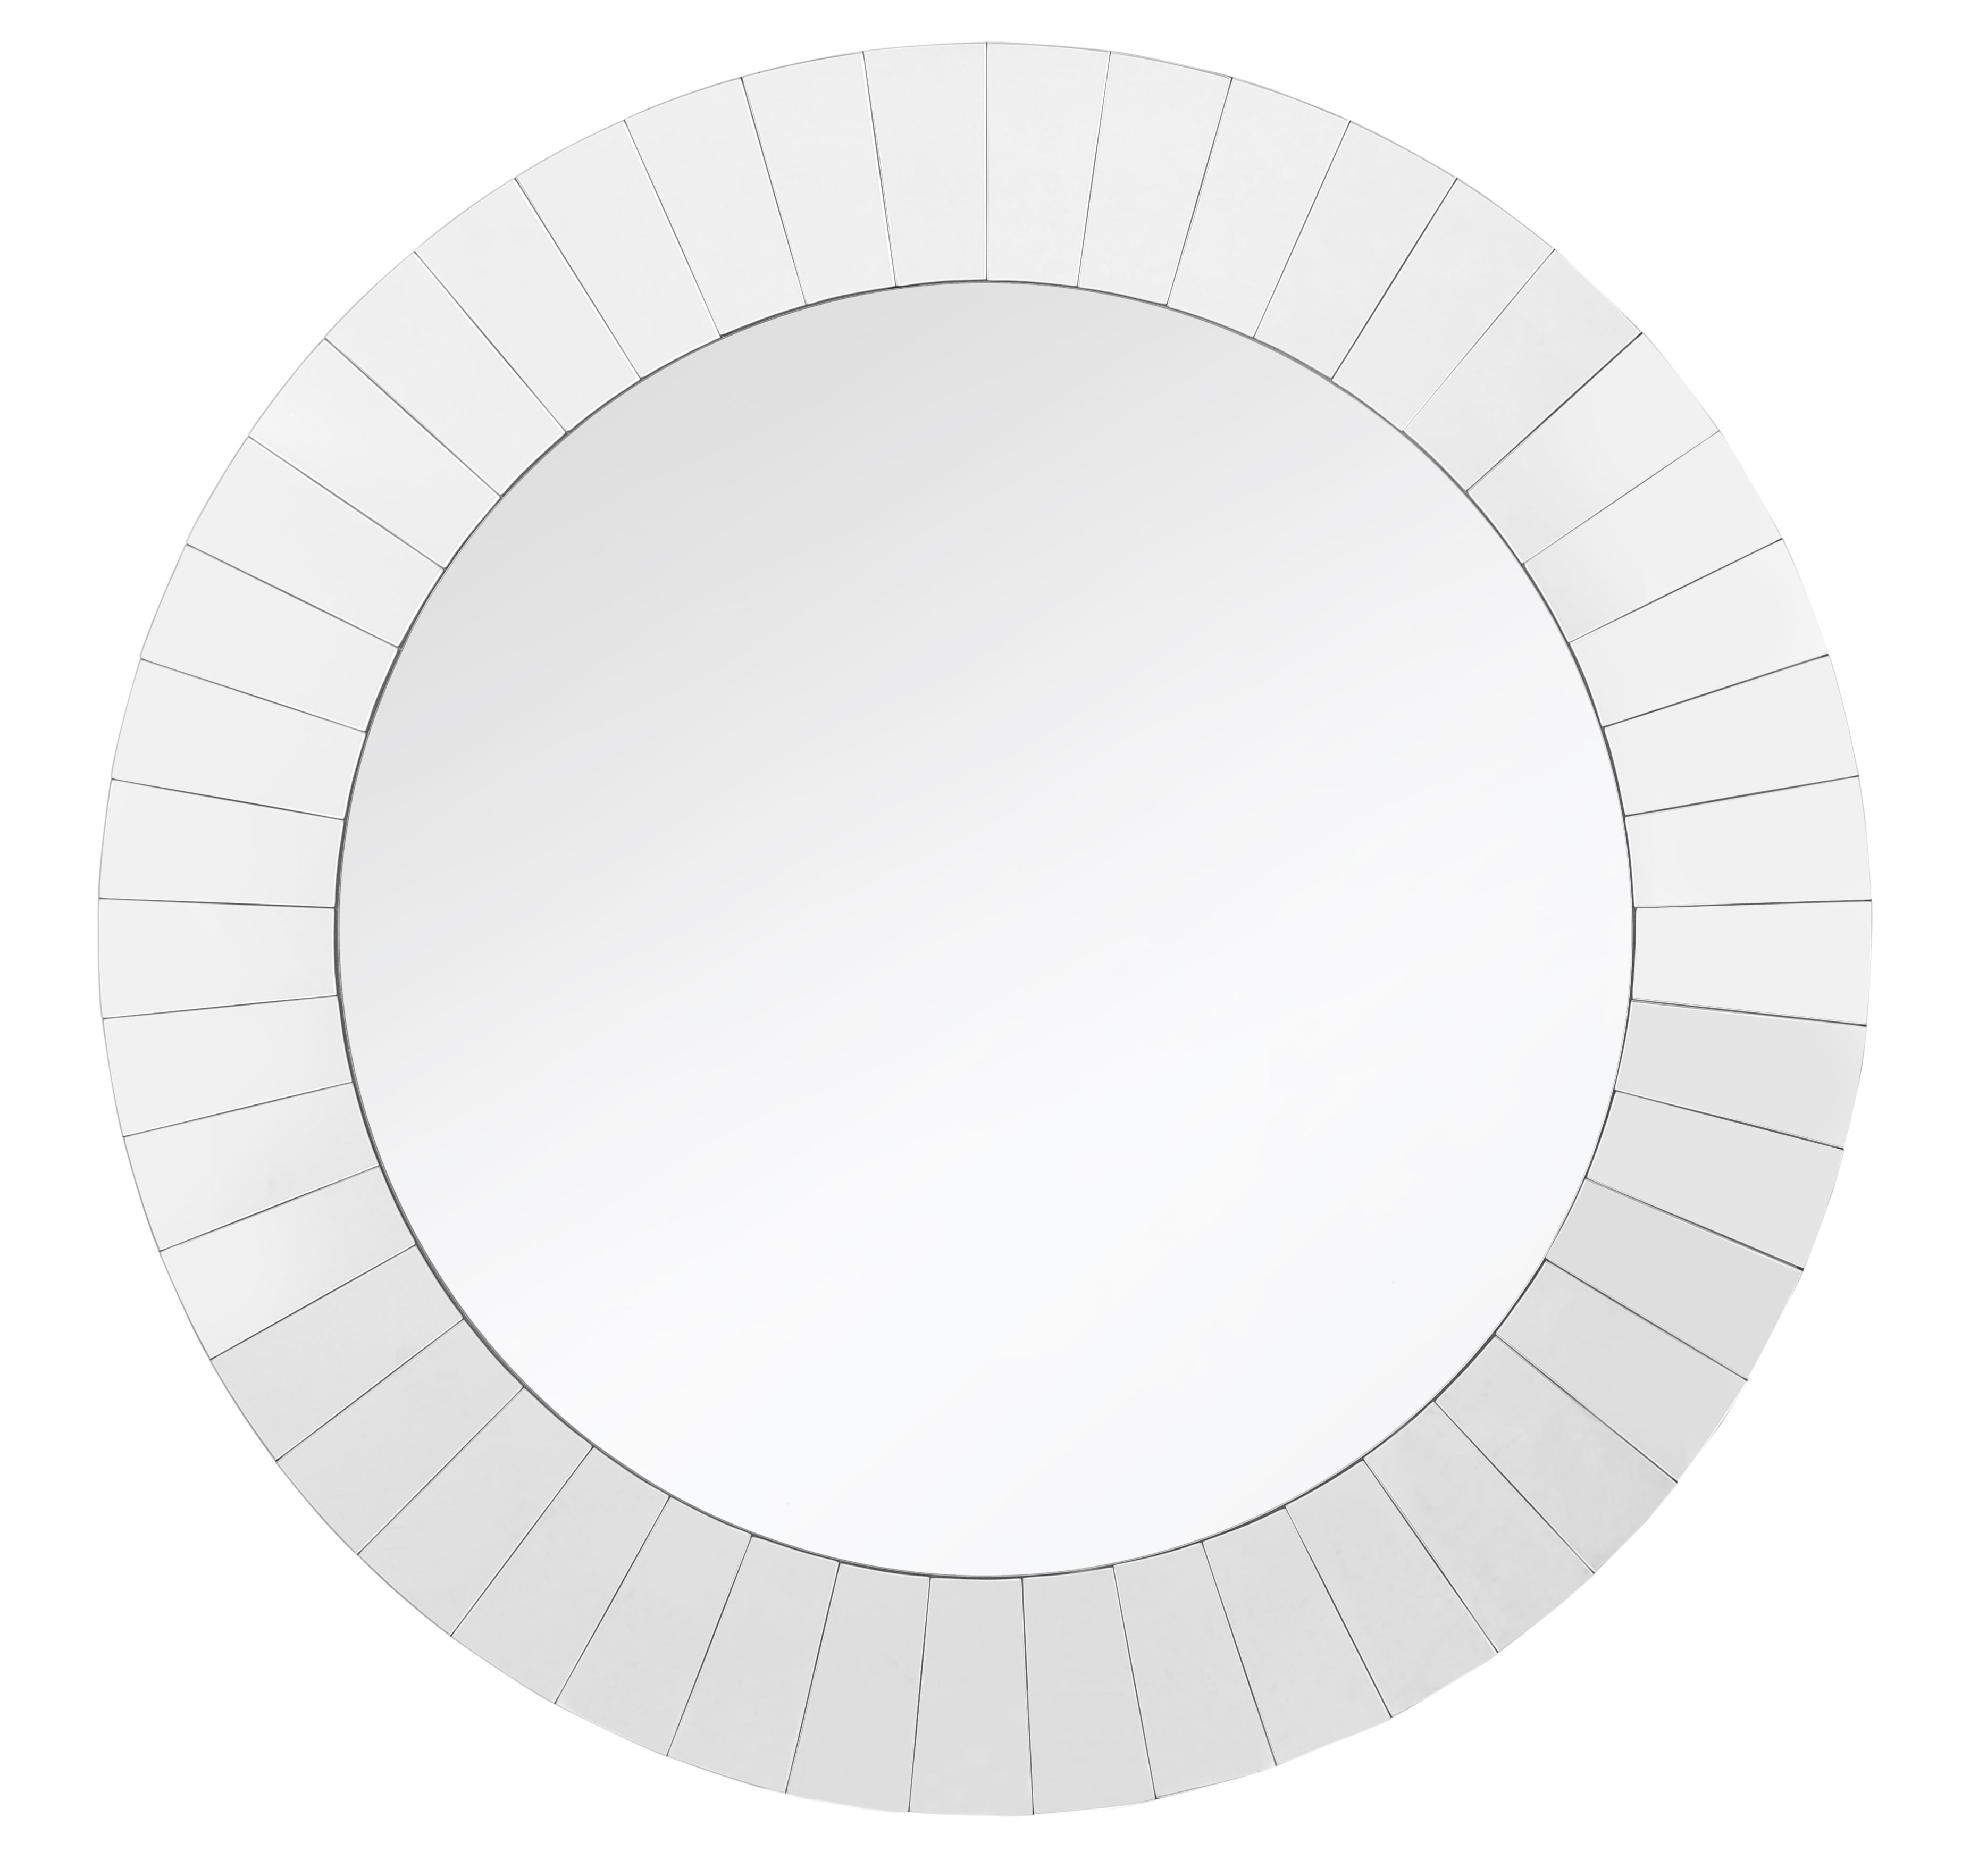 Picture of Camden Isle 86307 36 x 36 in. Daylight Round Accent Mirror